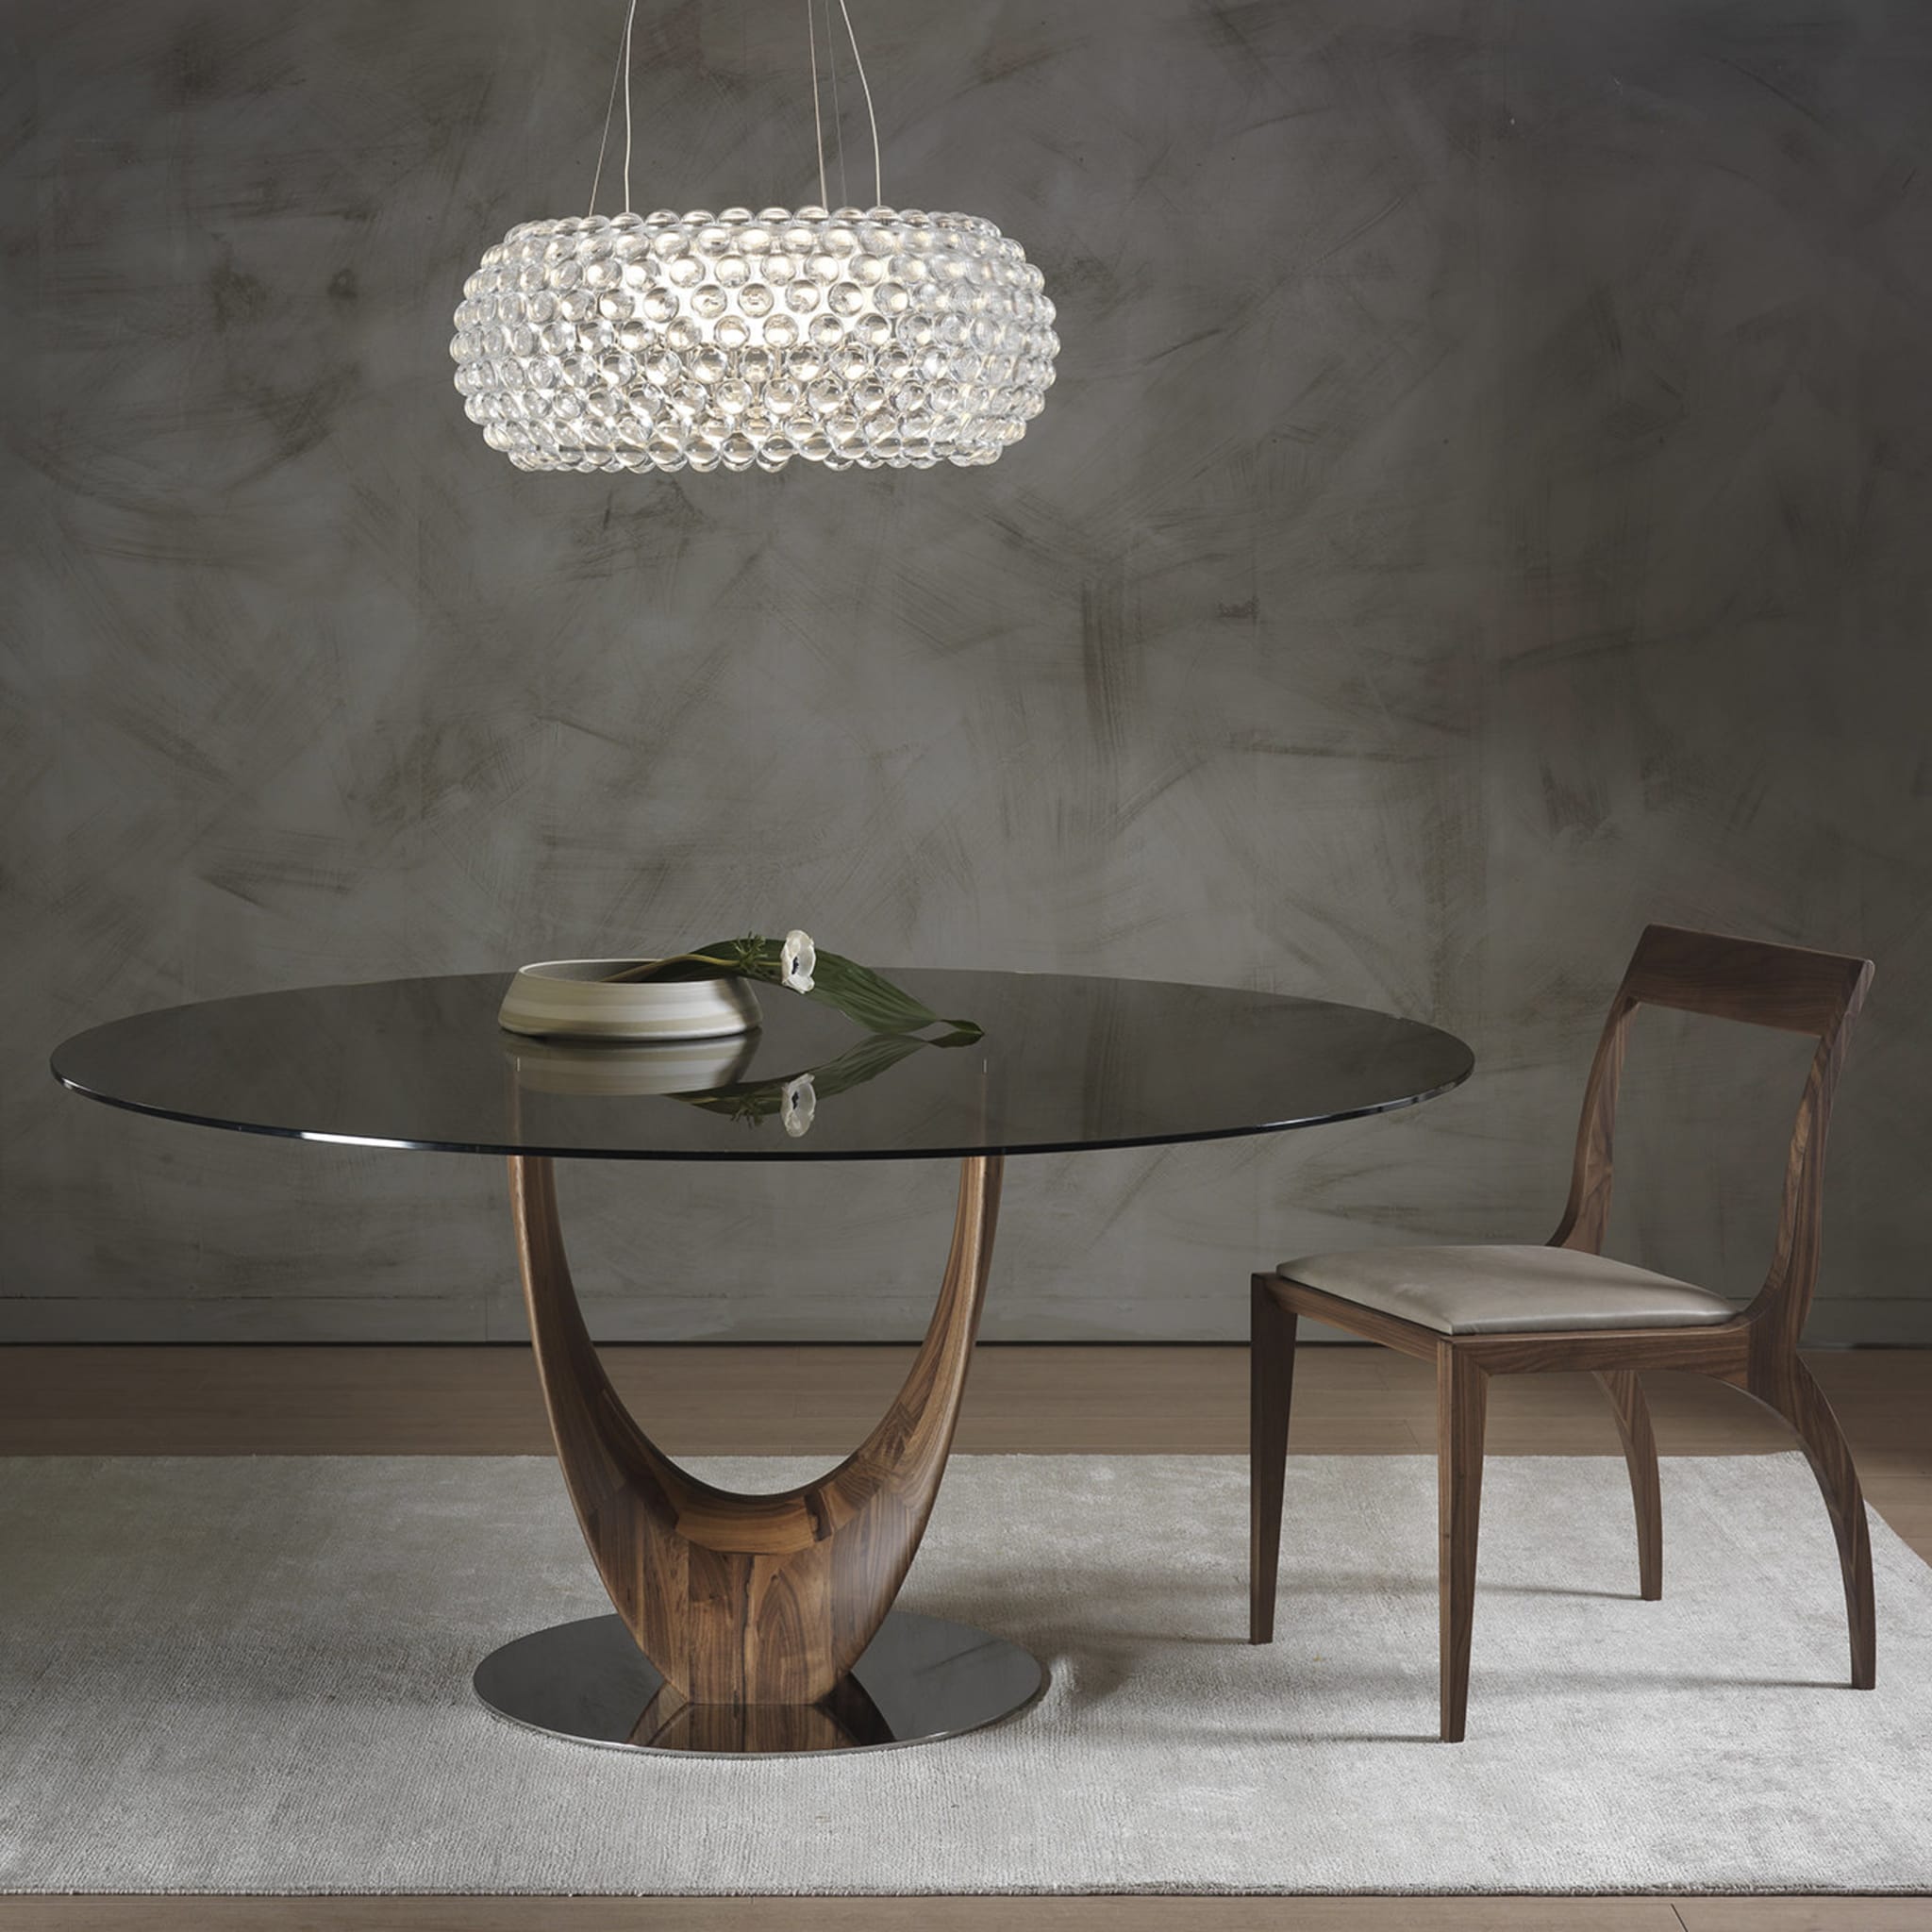 Axis Round Large Dining Table with Transparent Bronzed Glass Top by Stefano Bigi - Alternative view 1